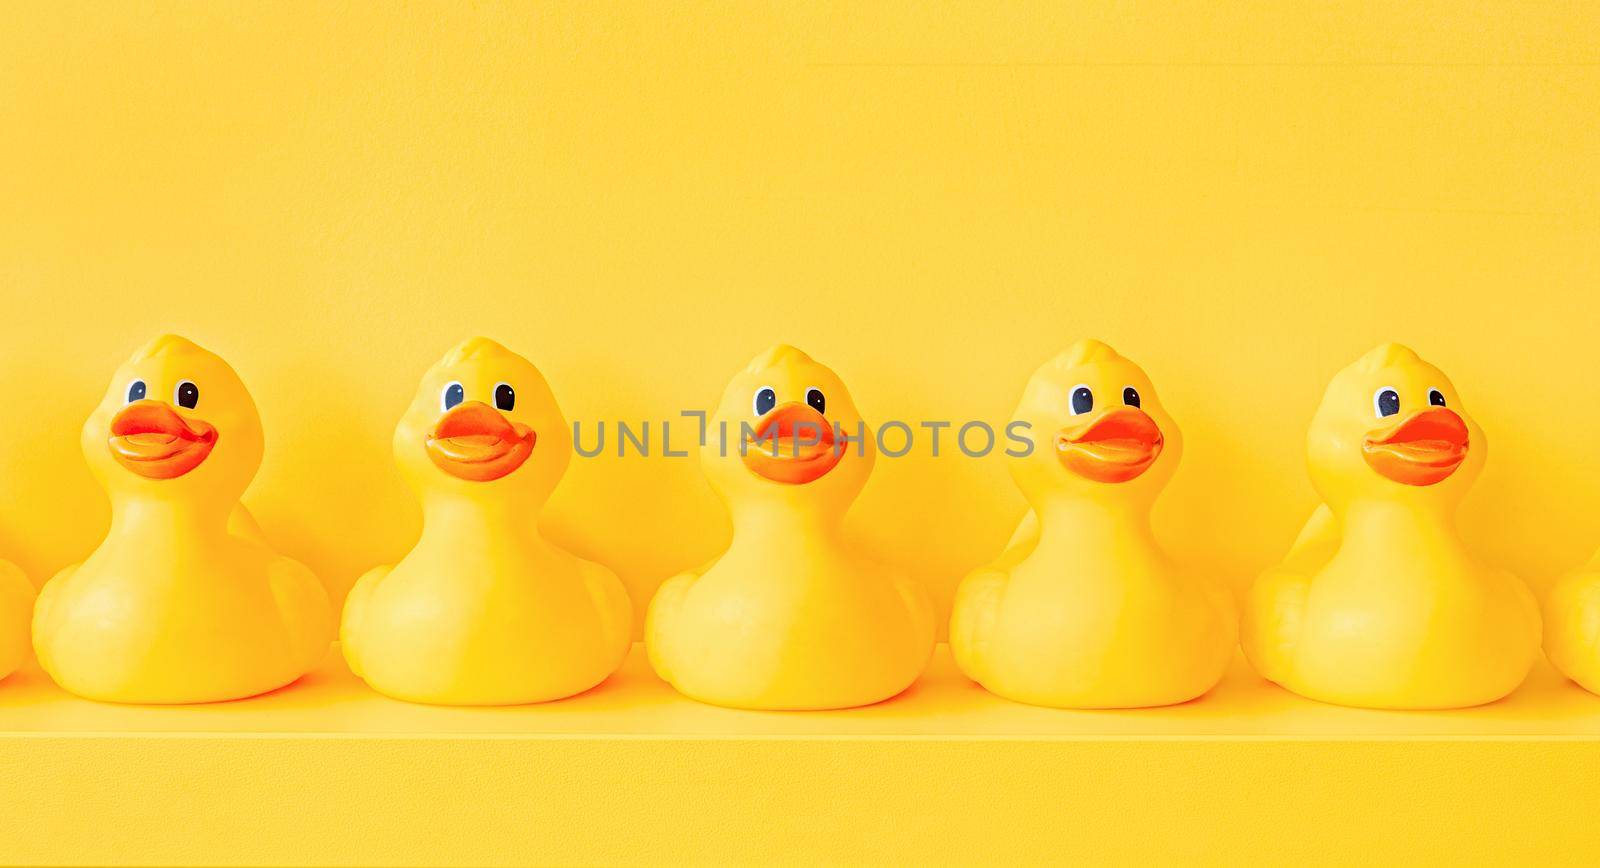 Design yellow rubber ducks in a line toy design shelf decor. Communication. Community. Association. Organize. Rubber duck pattern yellow concept. Rubber ducky bath toy background yellow ducks in a row by synel